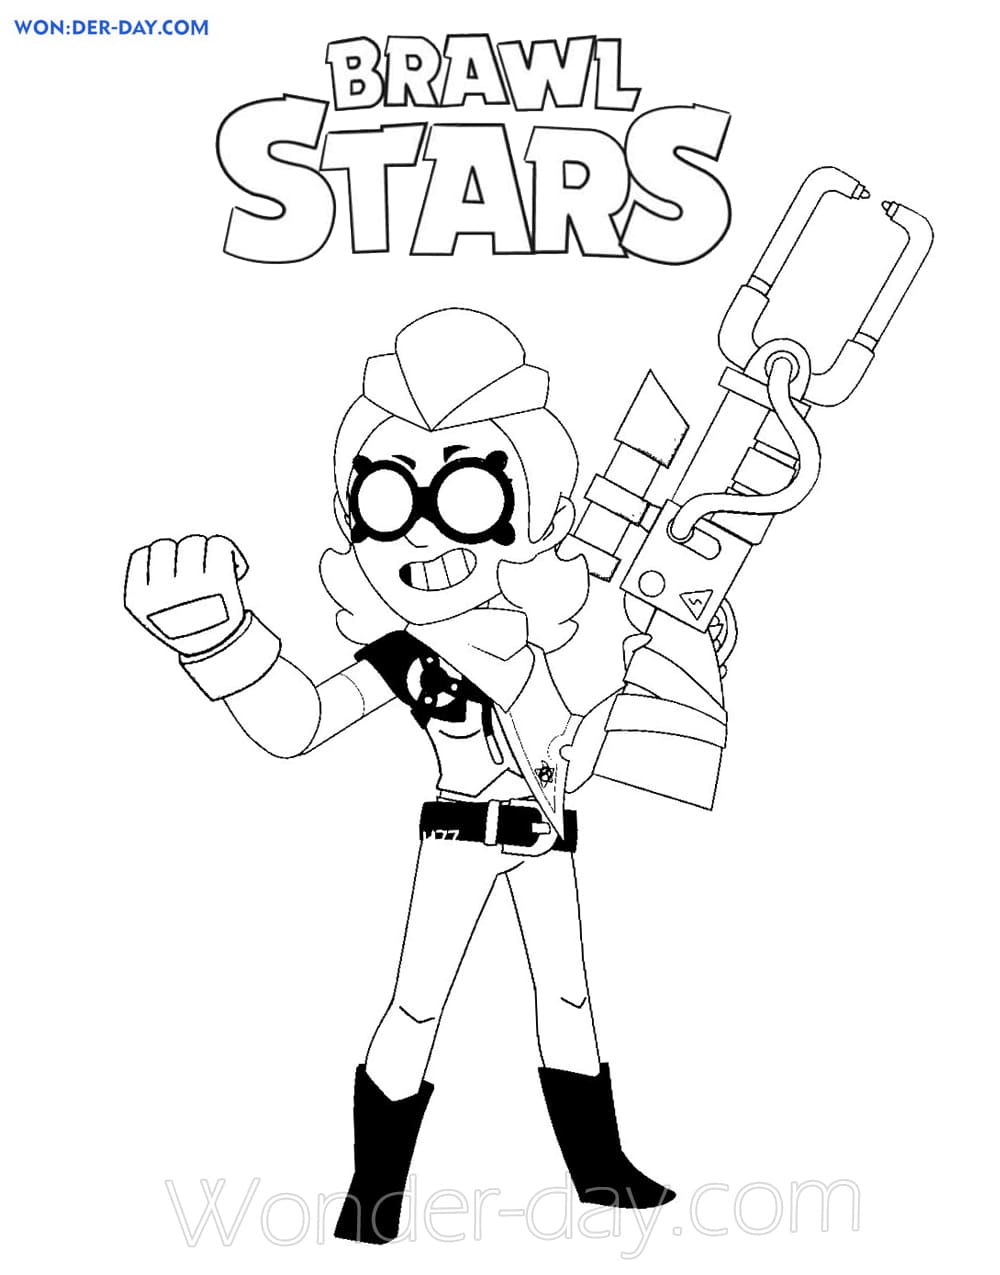 Belle Brawl Stars Coloring Pages Wonder Day Coloring Pages For Children And Adults - brawl stars belle coloring pages